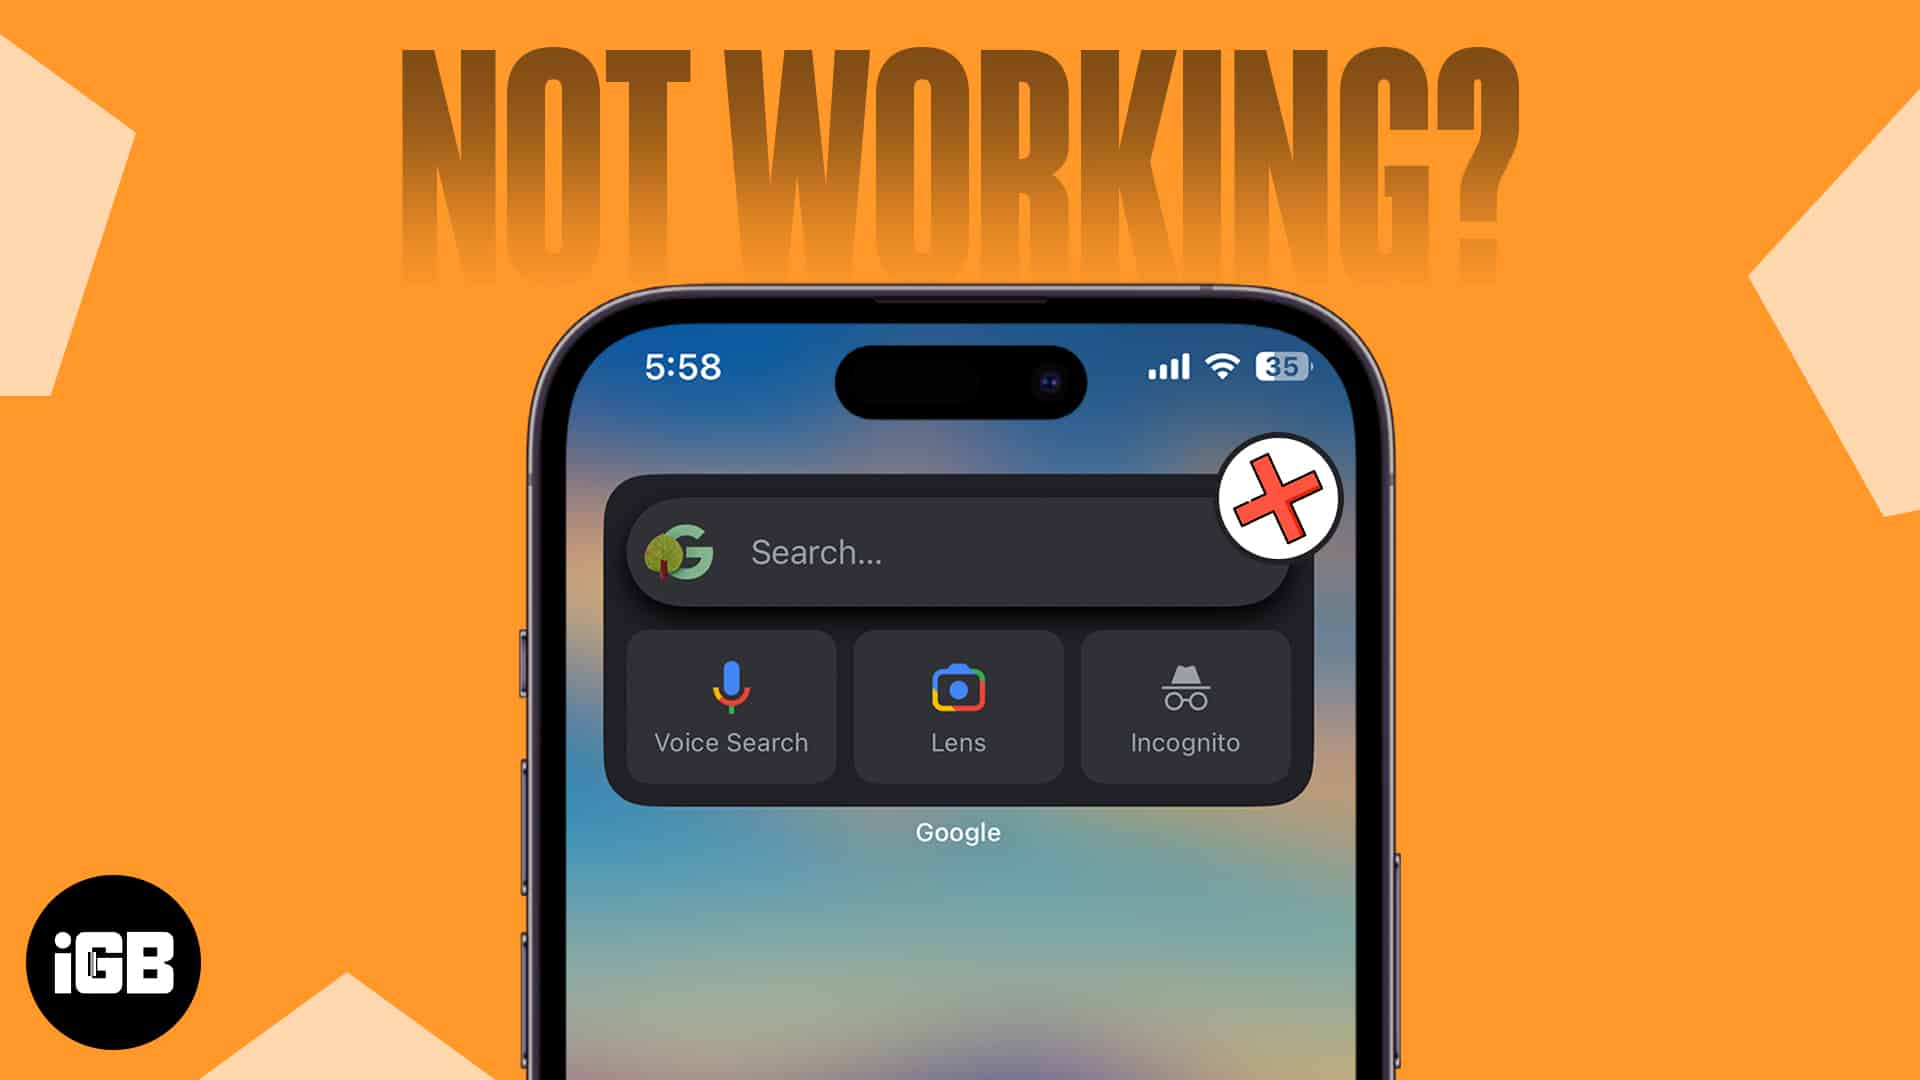 Why won't Google search work on my iPhone?